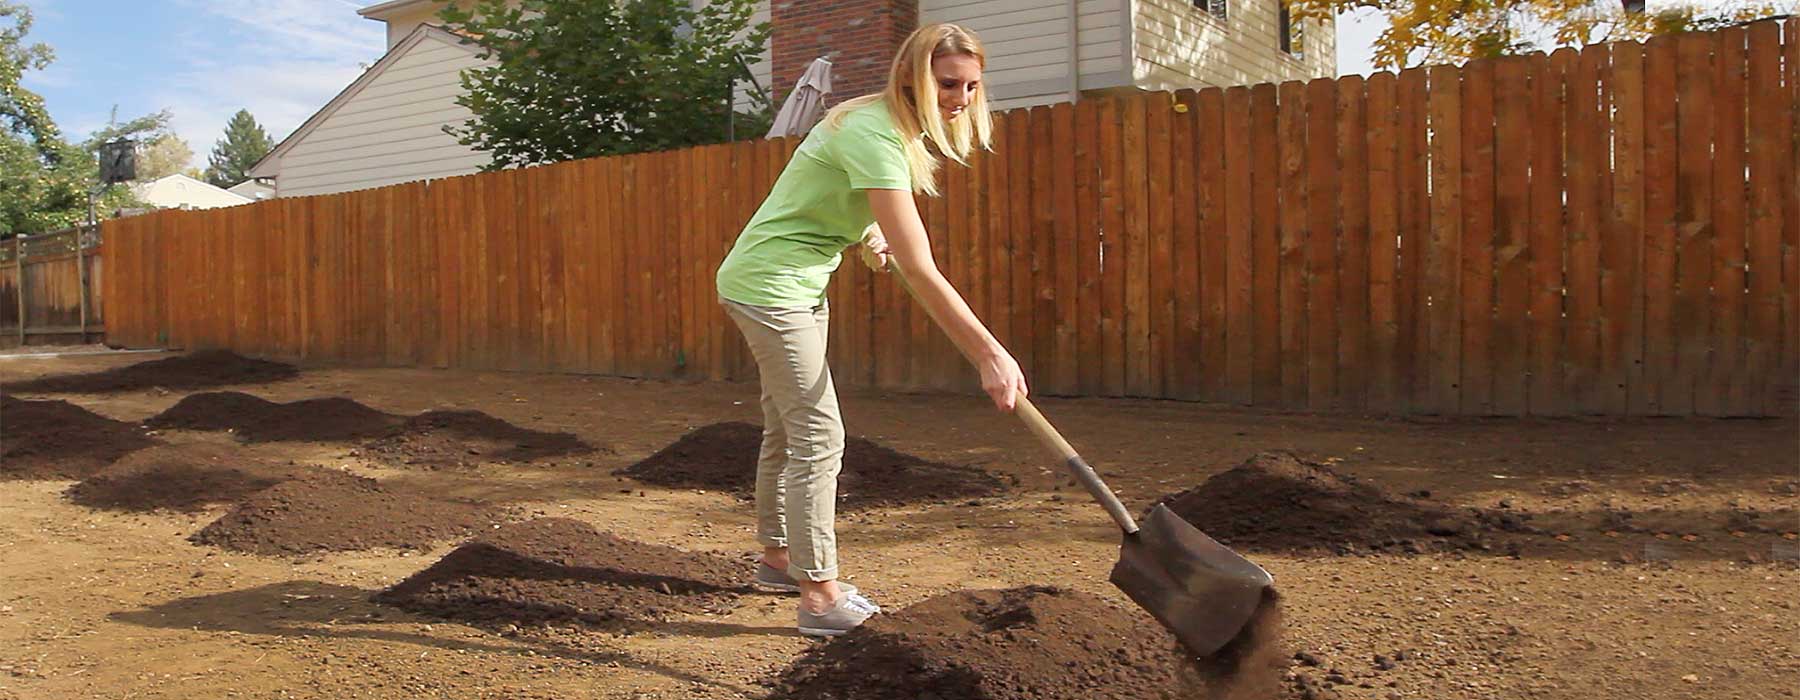 Adding compost and tilling before sodding will help save water in the long run.